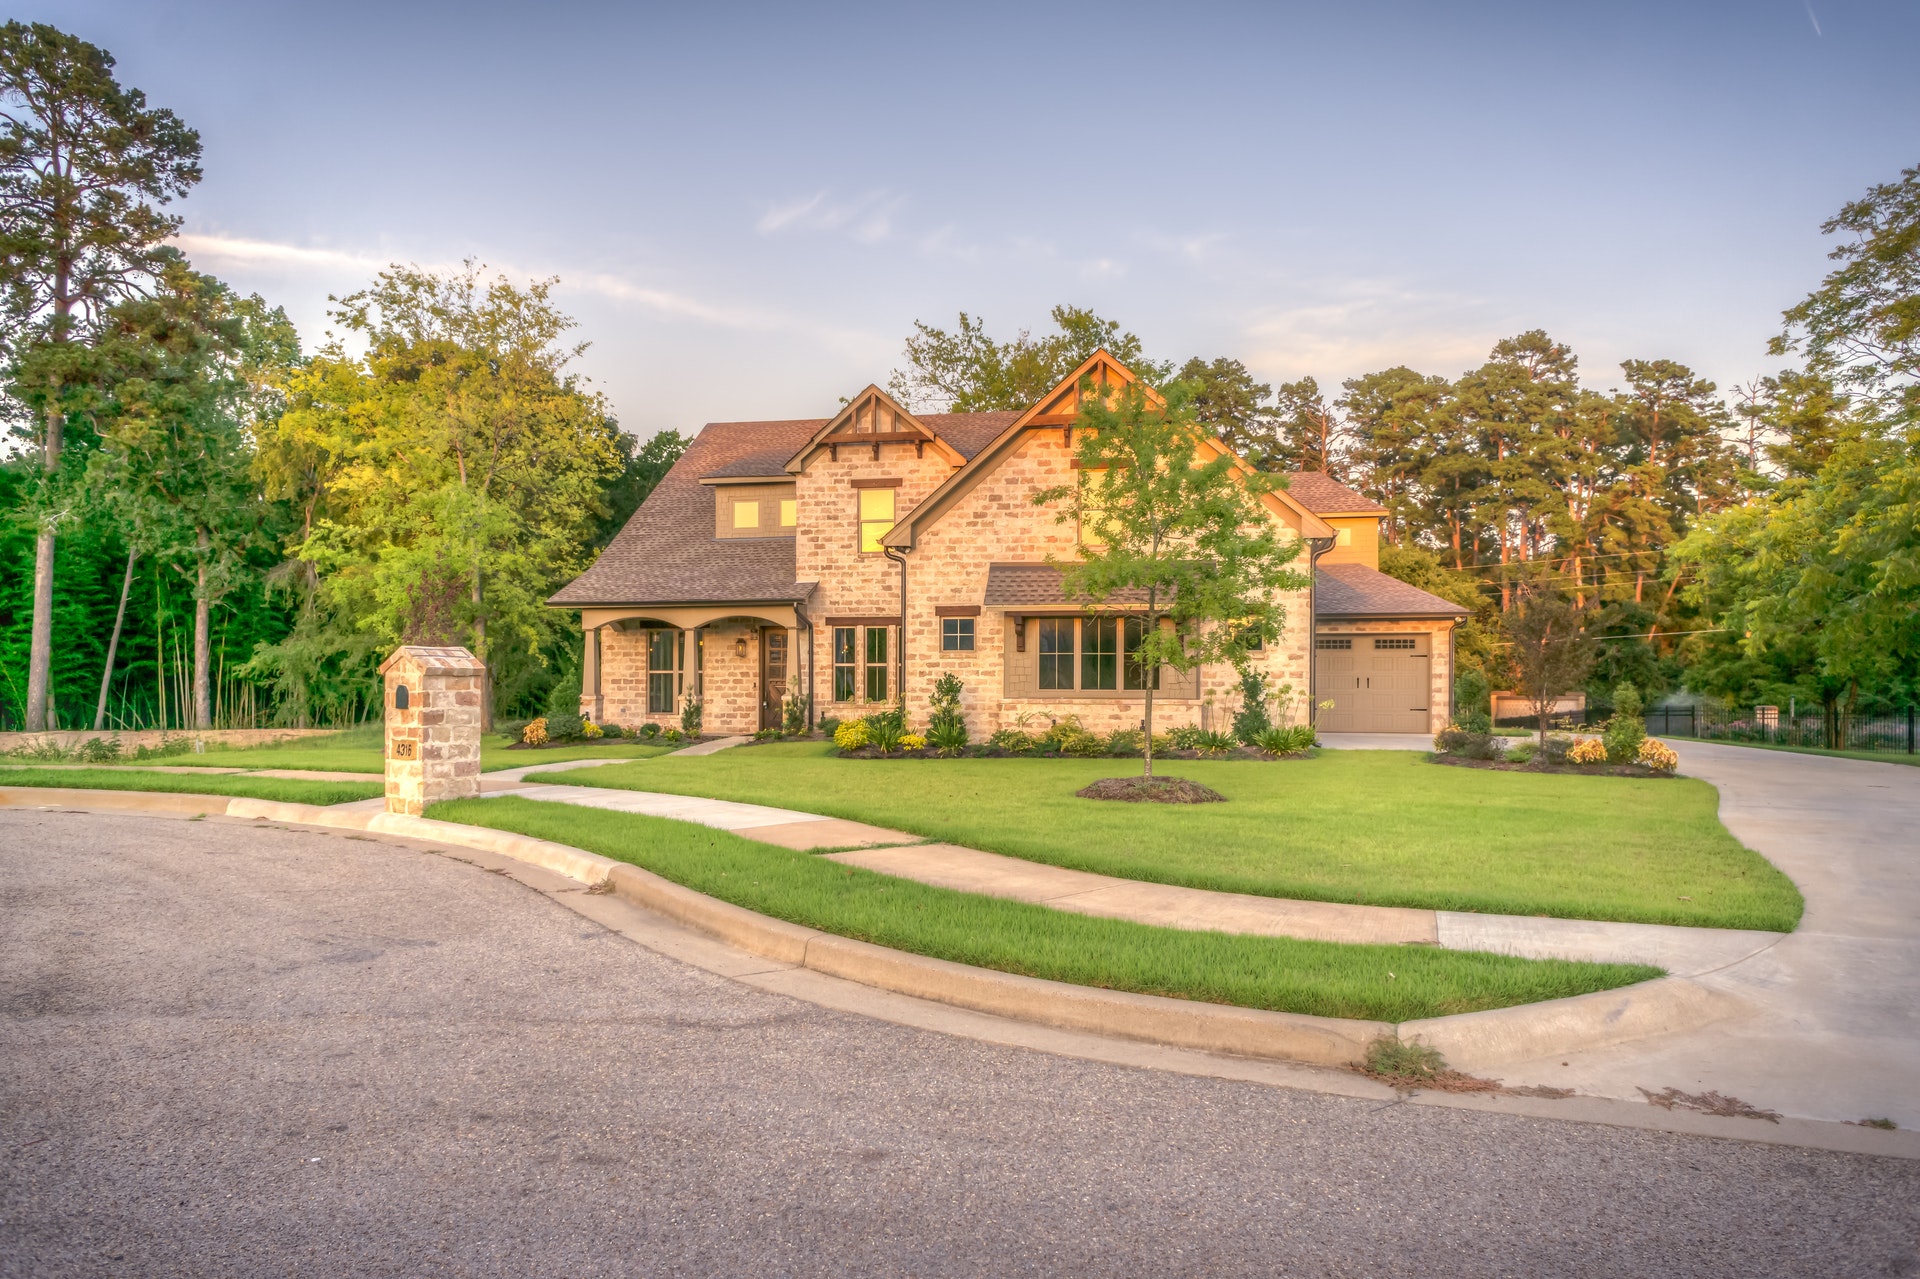 What To Consider When Planning A Driveway